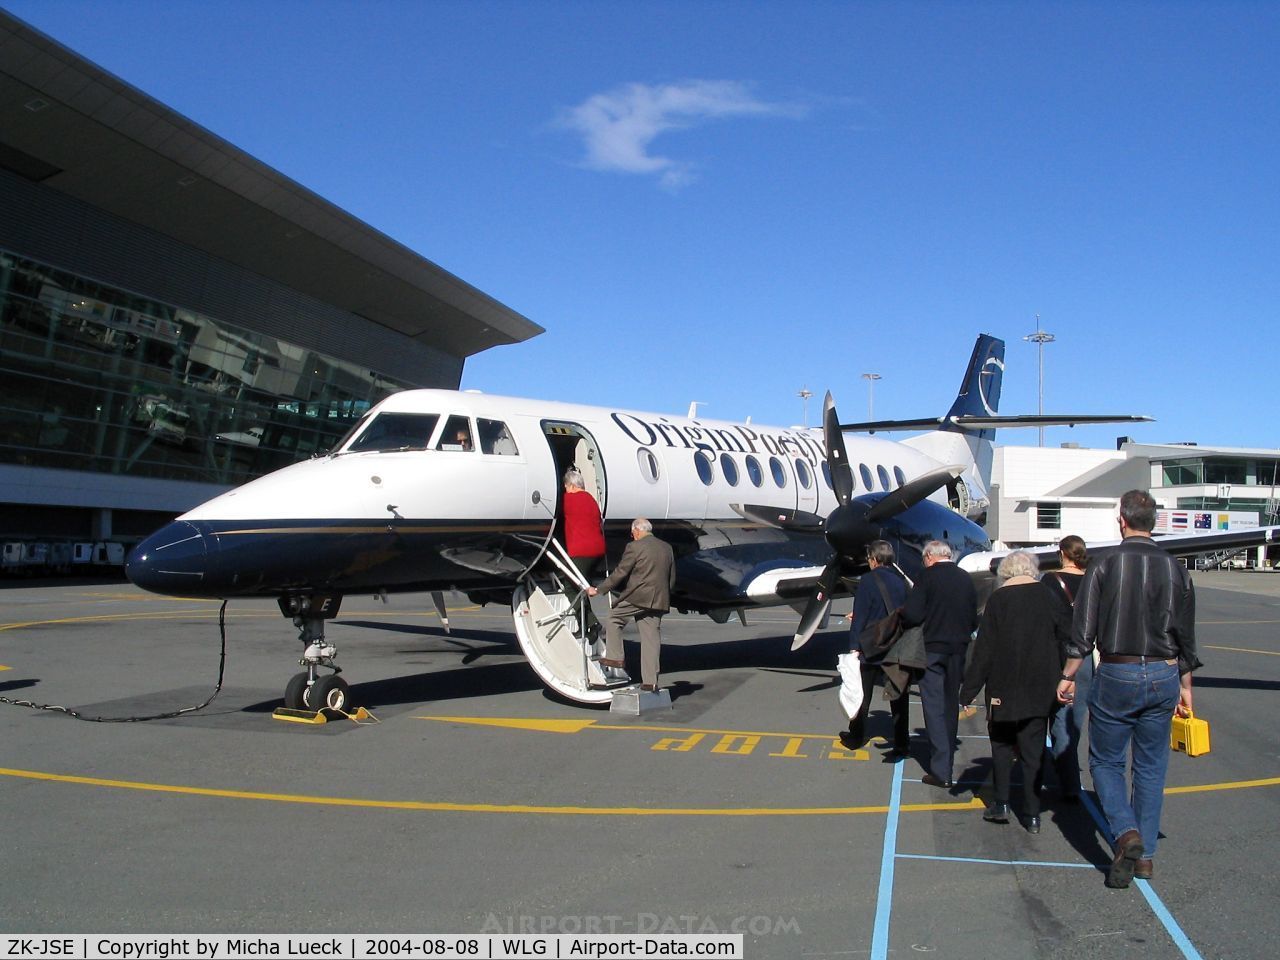 ZK-JSE, 1995 British Aerospace Jetstream 41 C/N 41046, Boarding for the 40 minute hop across the Cook Strait from Wellington to Nelson